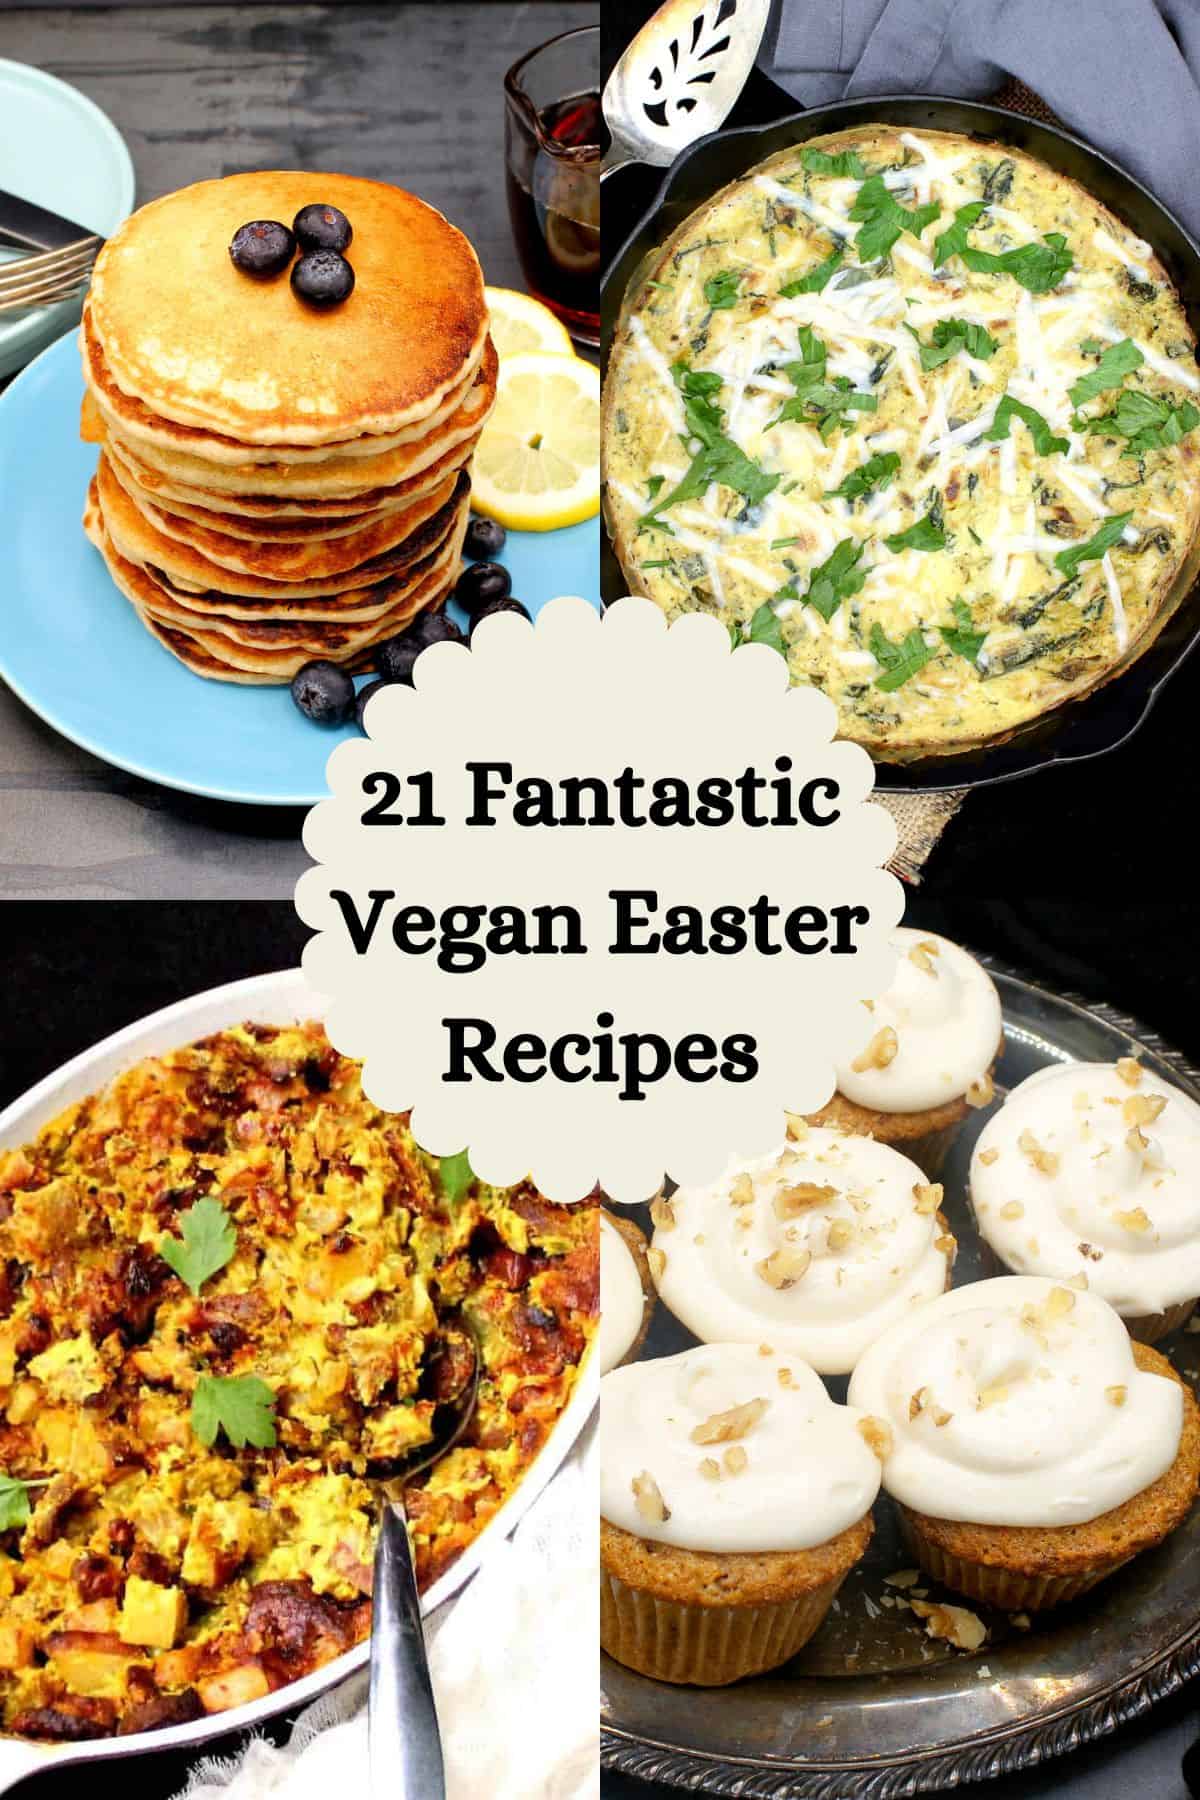 Images of easter recipes with text that says "21 fantastic vegan easter recipes".